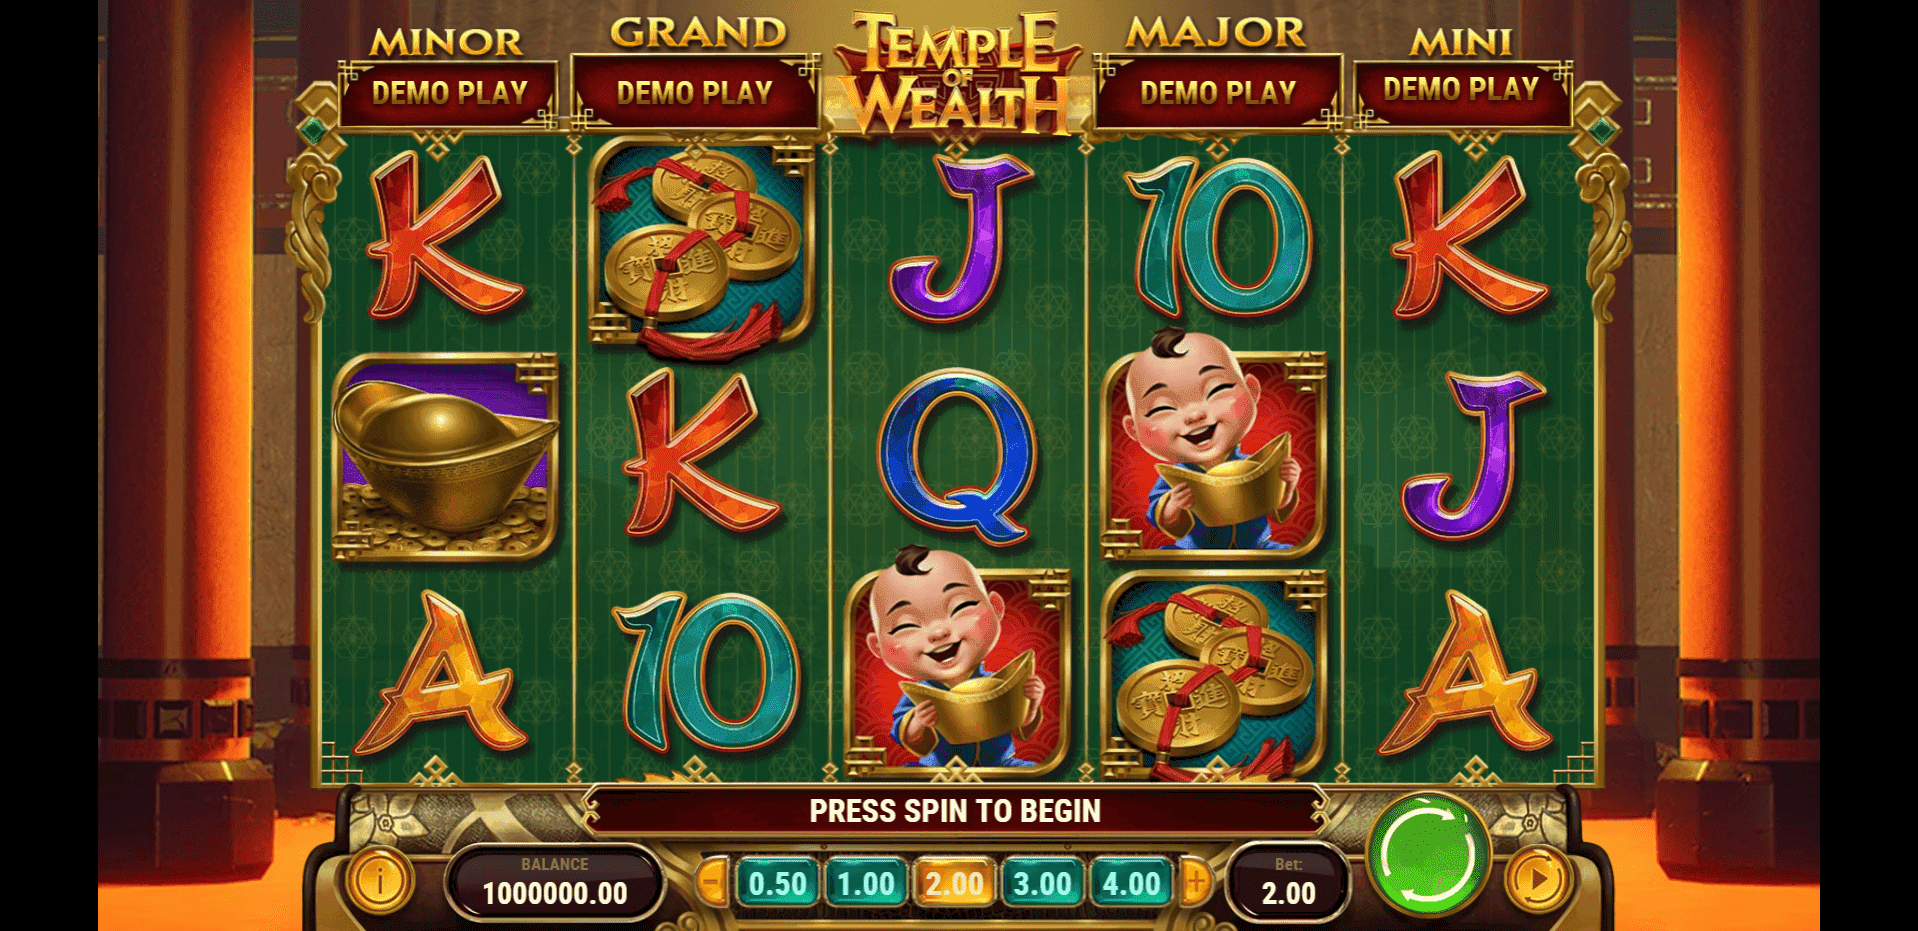 Temple of Wealth slot play free